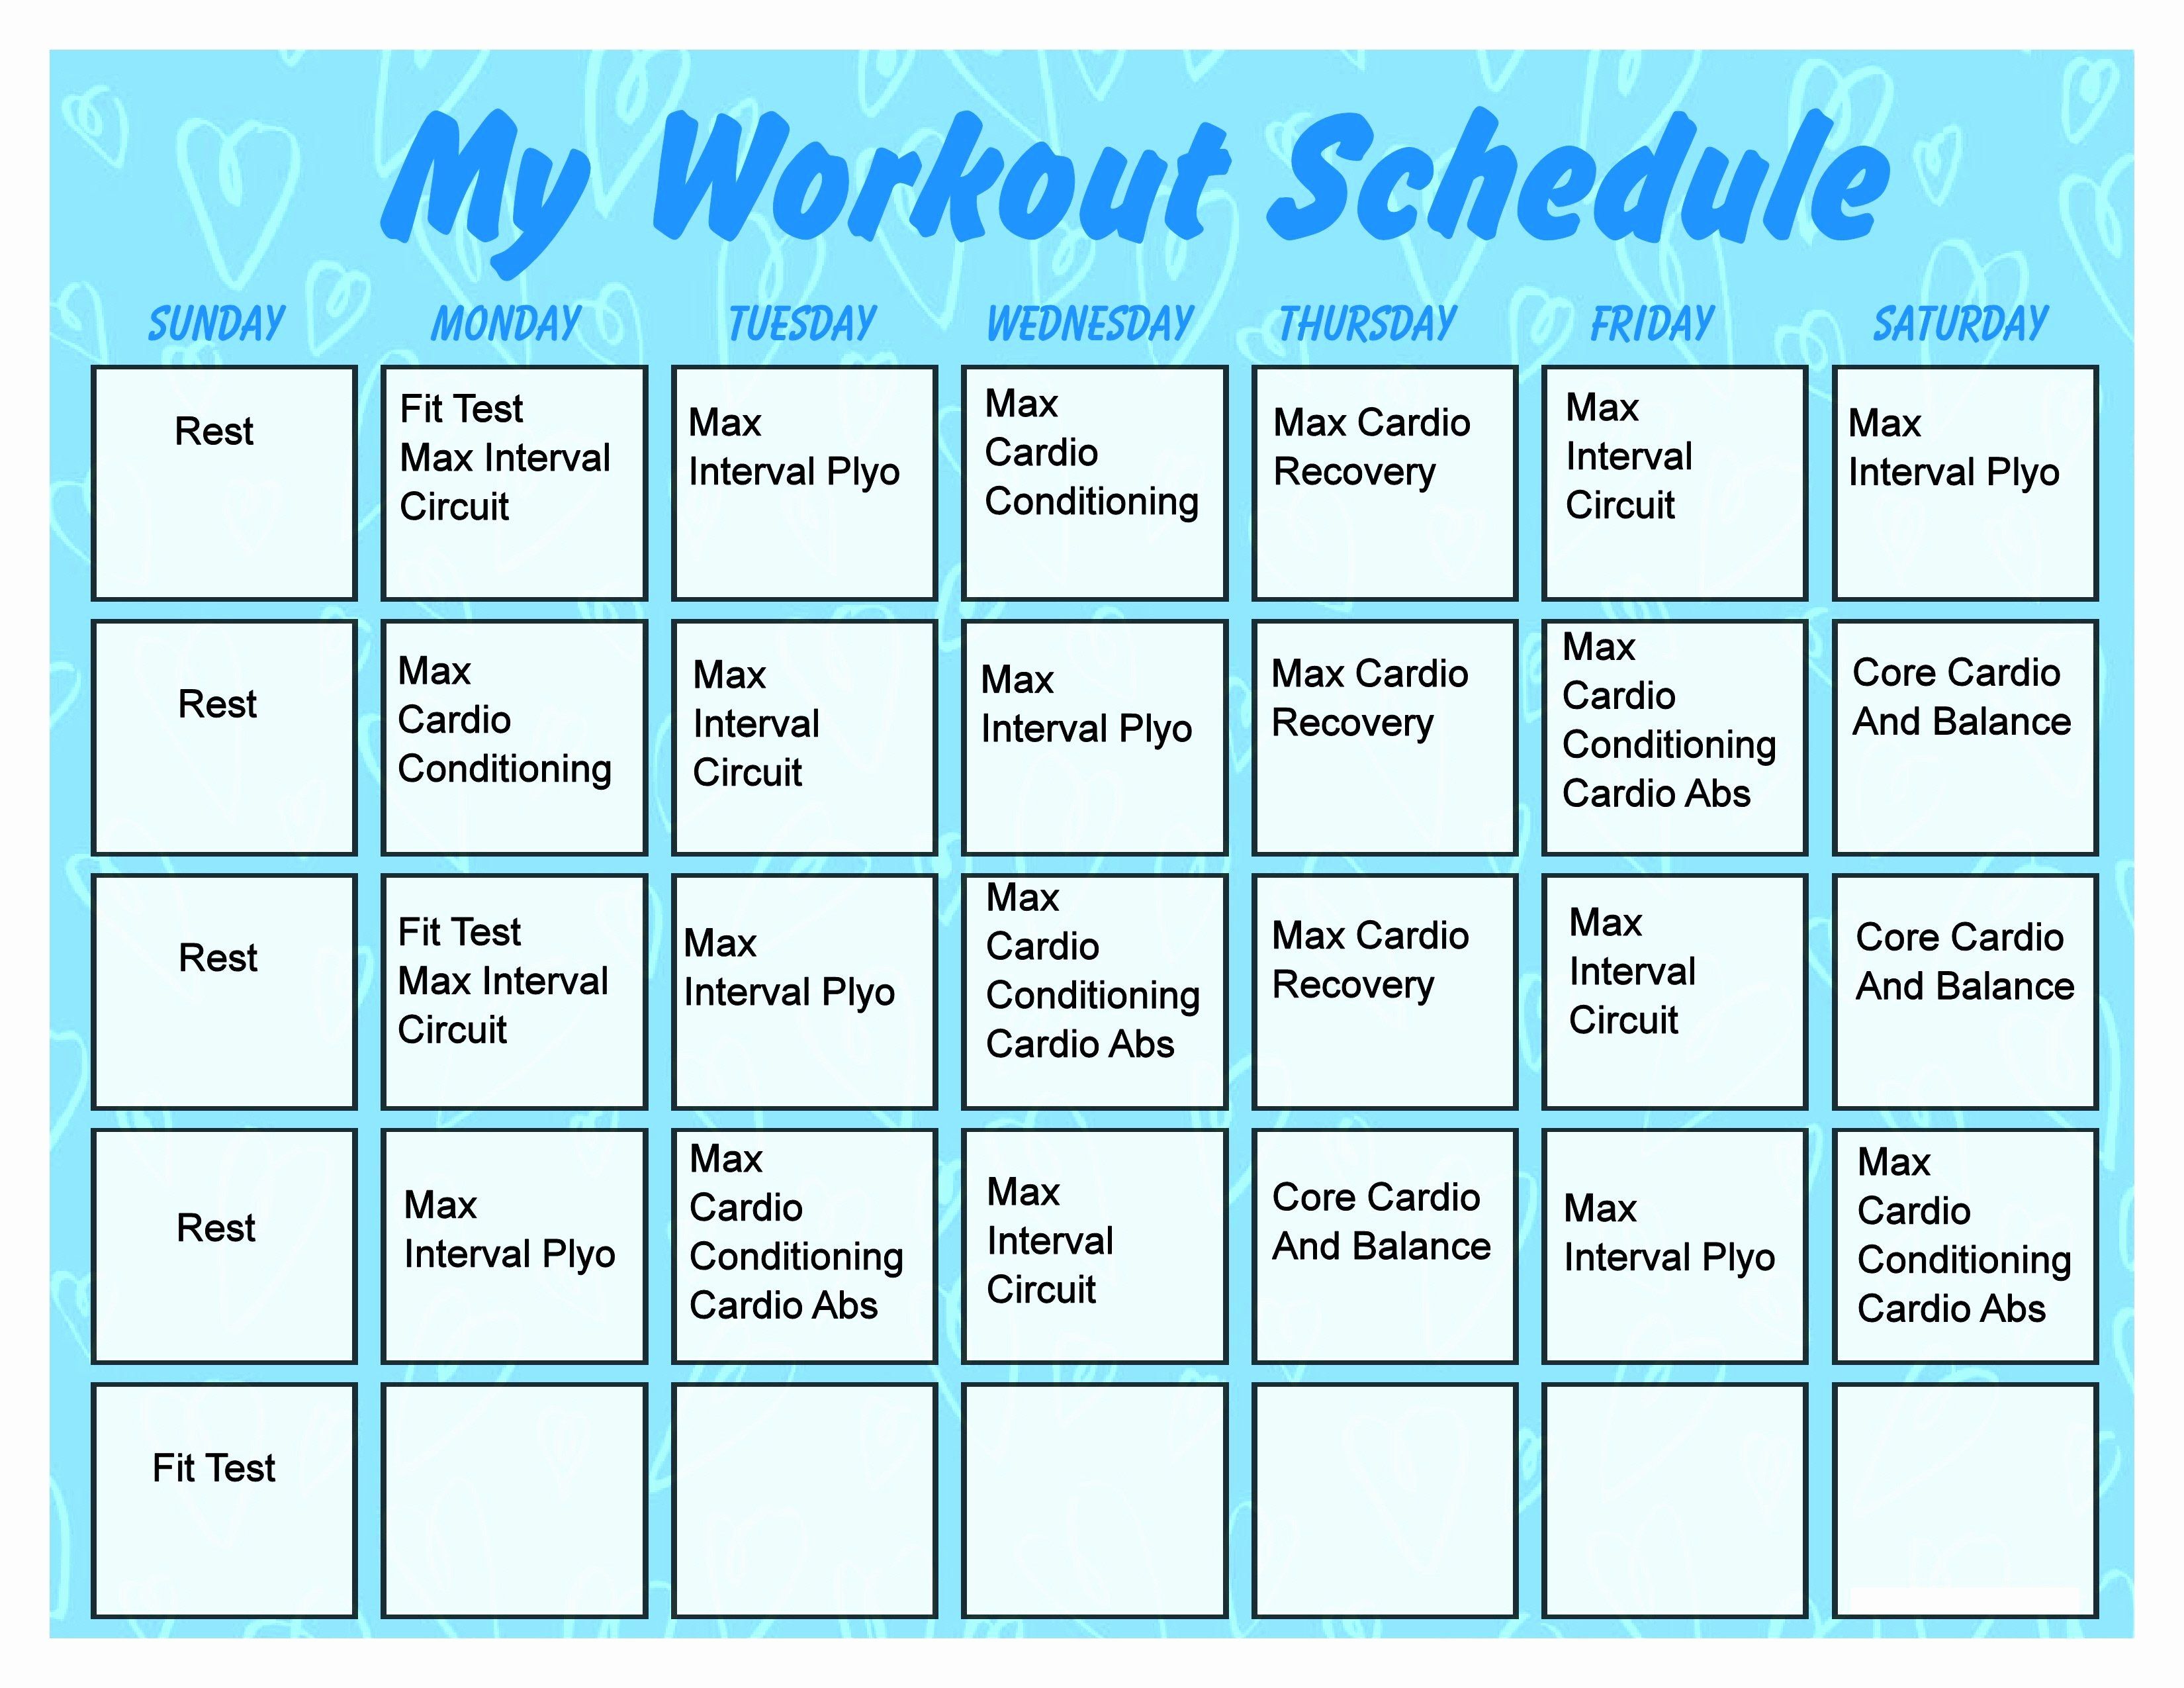 propsed calendar for work outs on excel 25